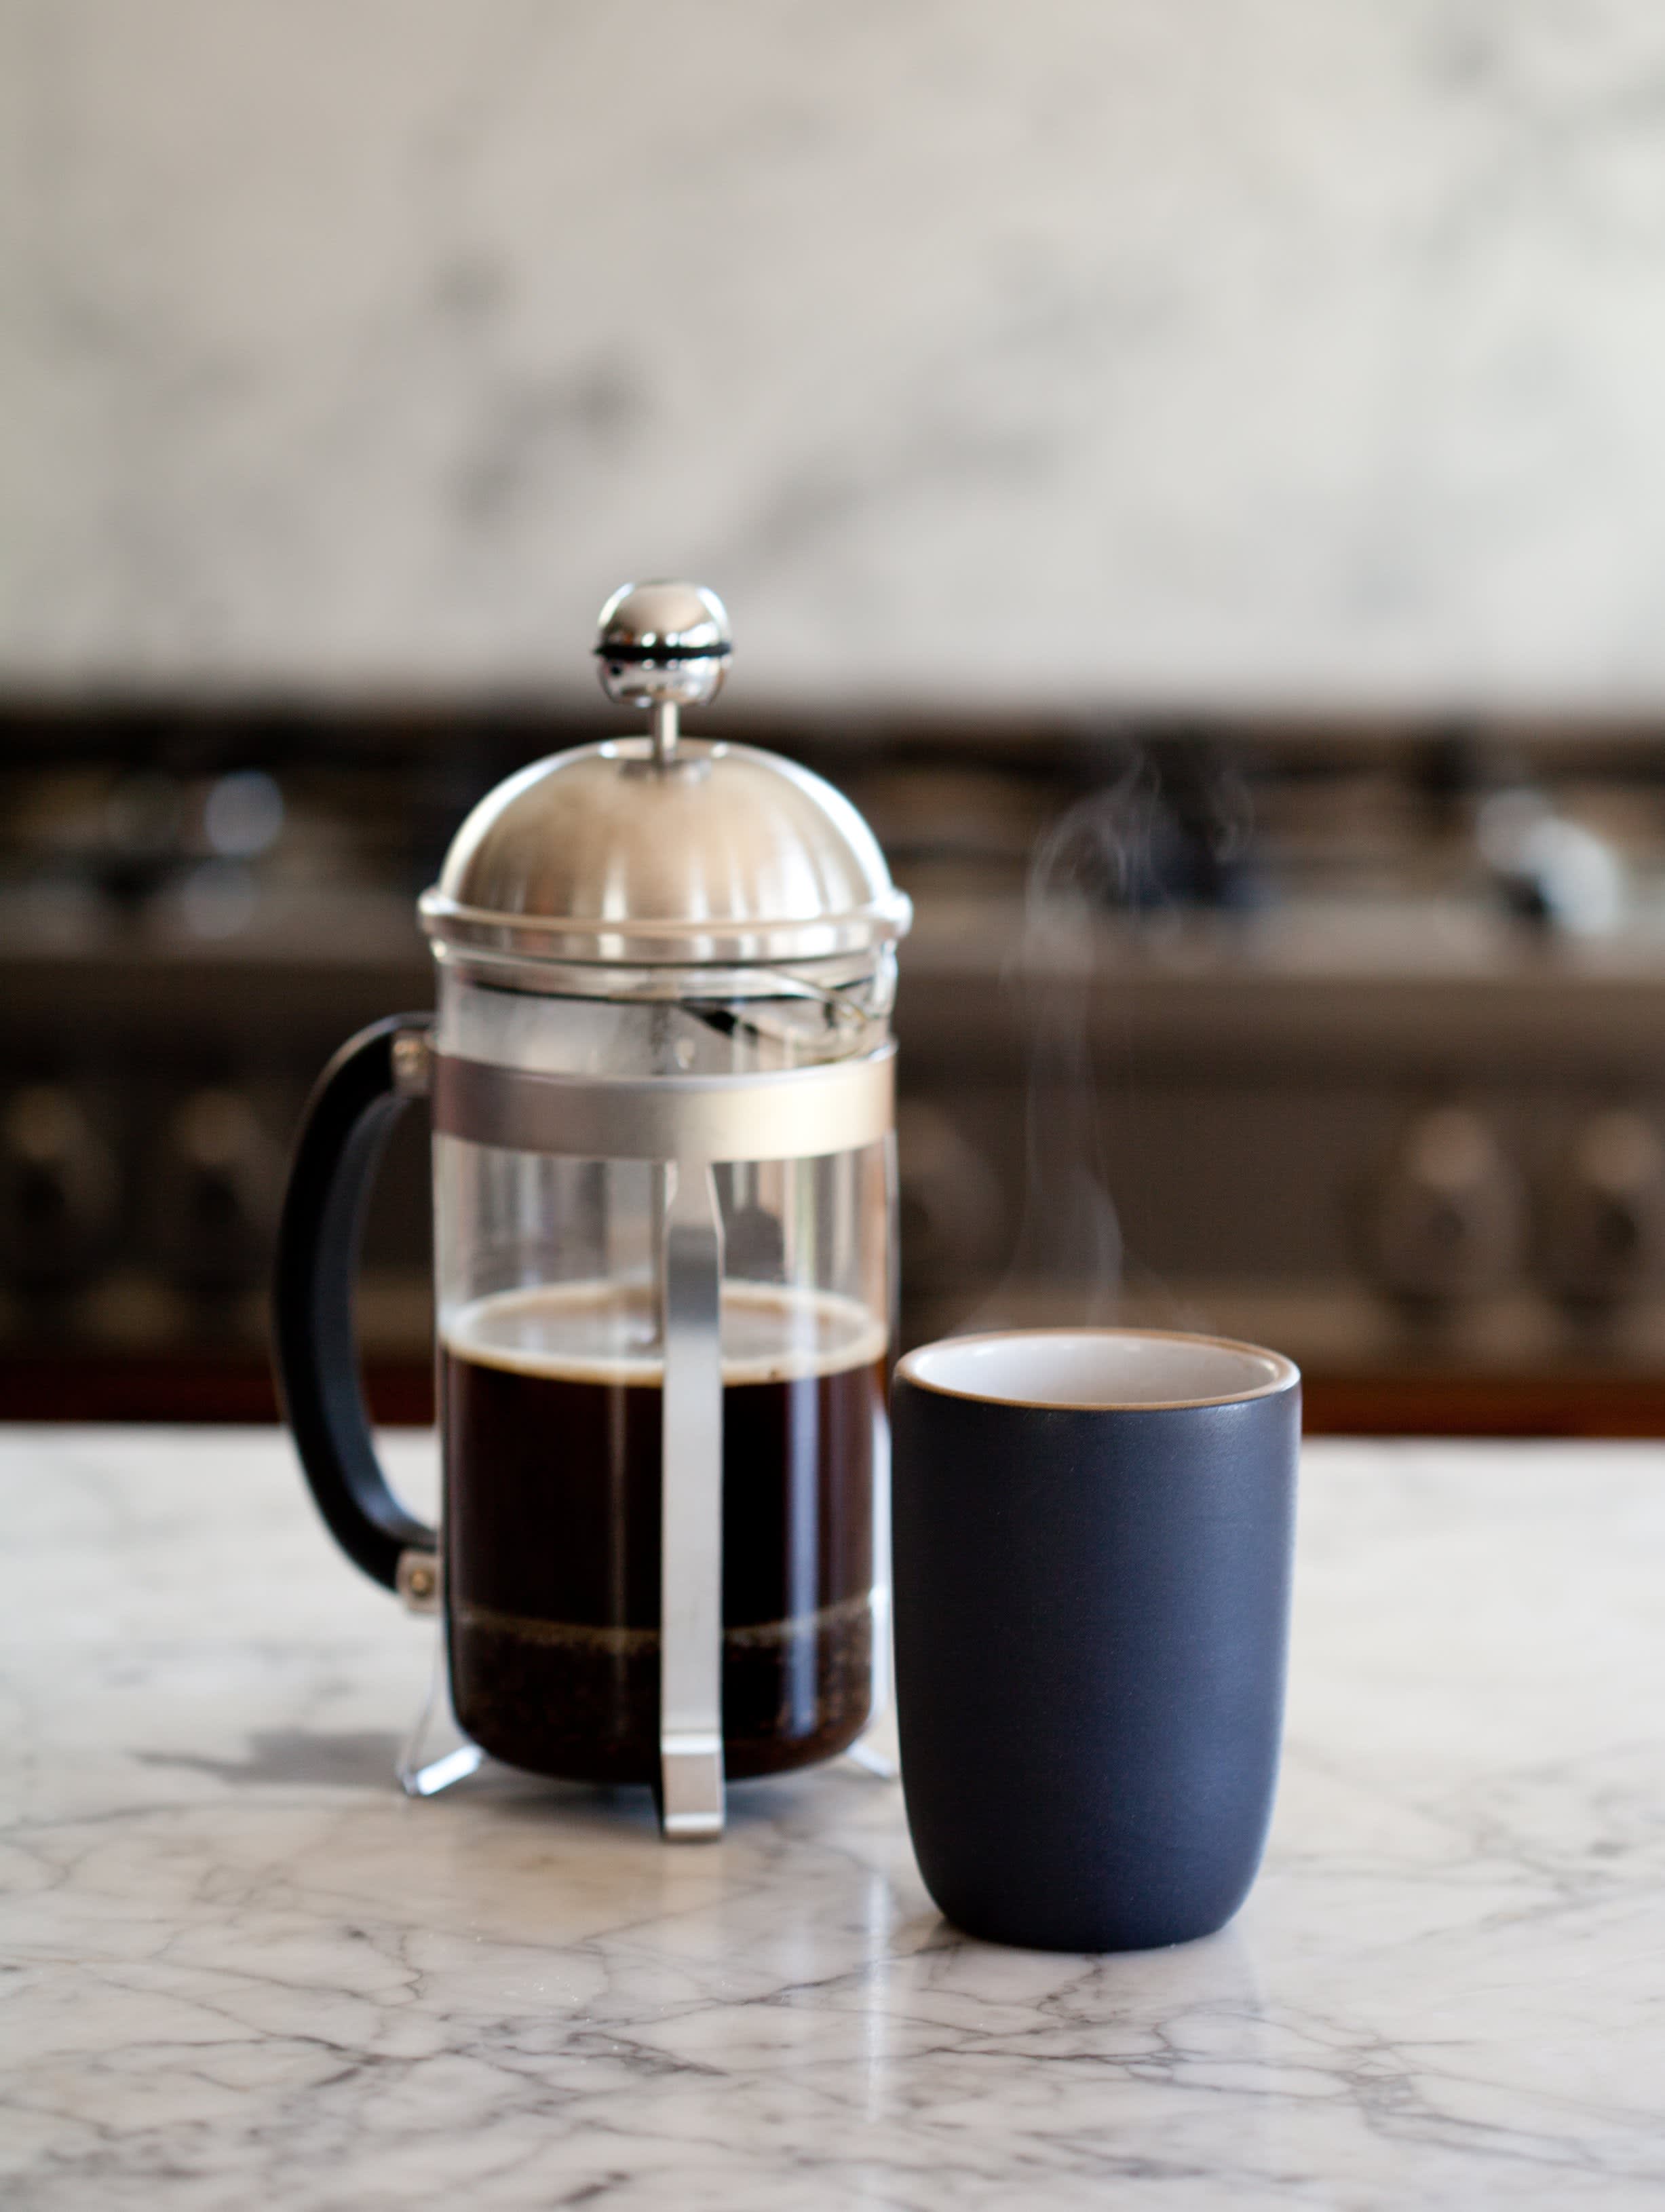 How To Make French Press Coffee | Kitchn